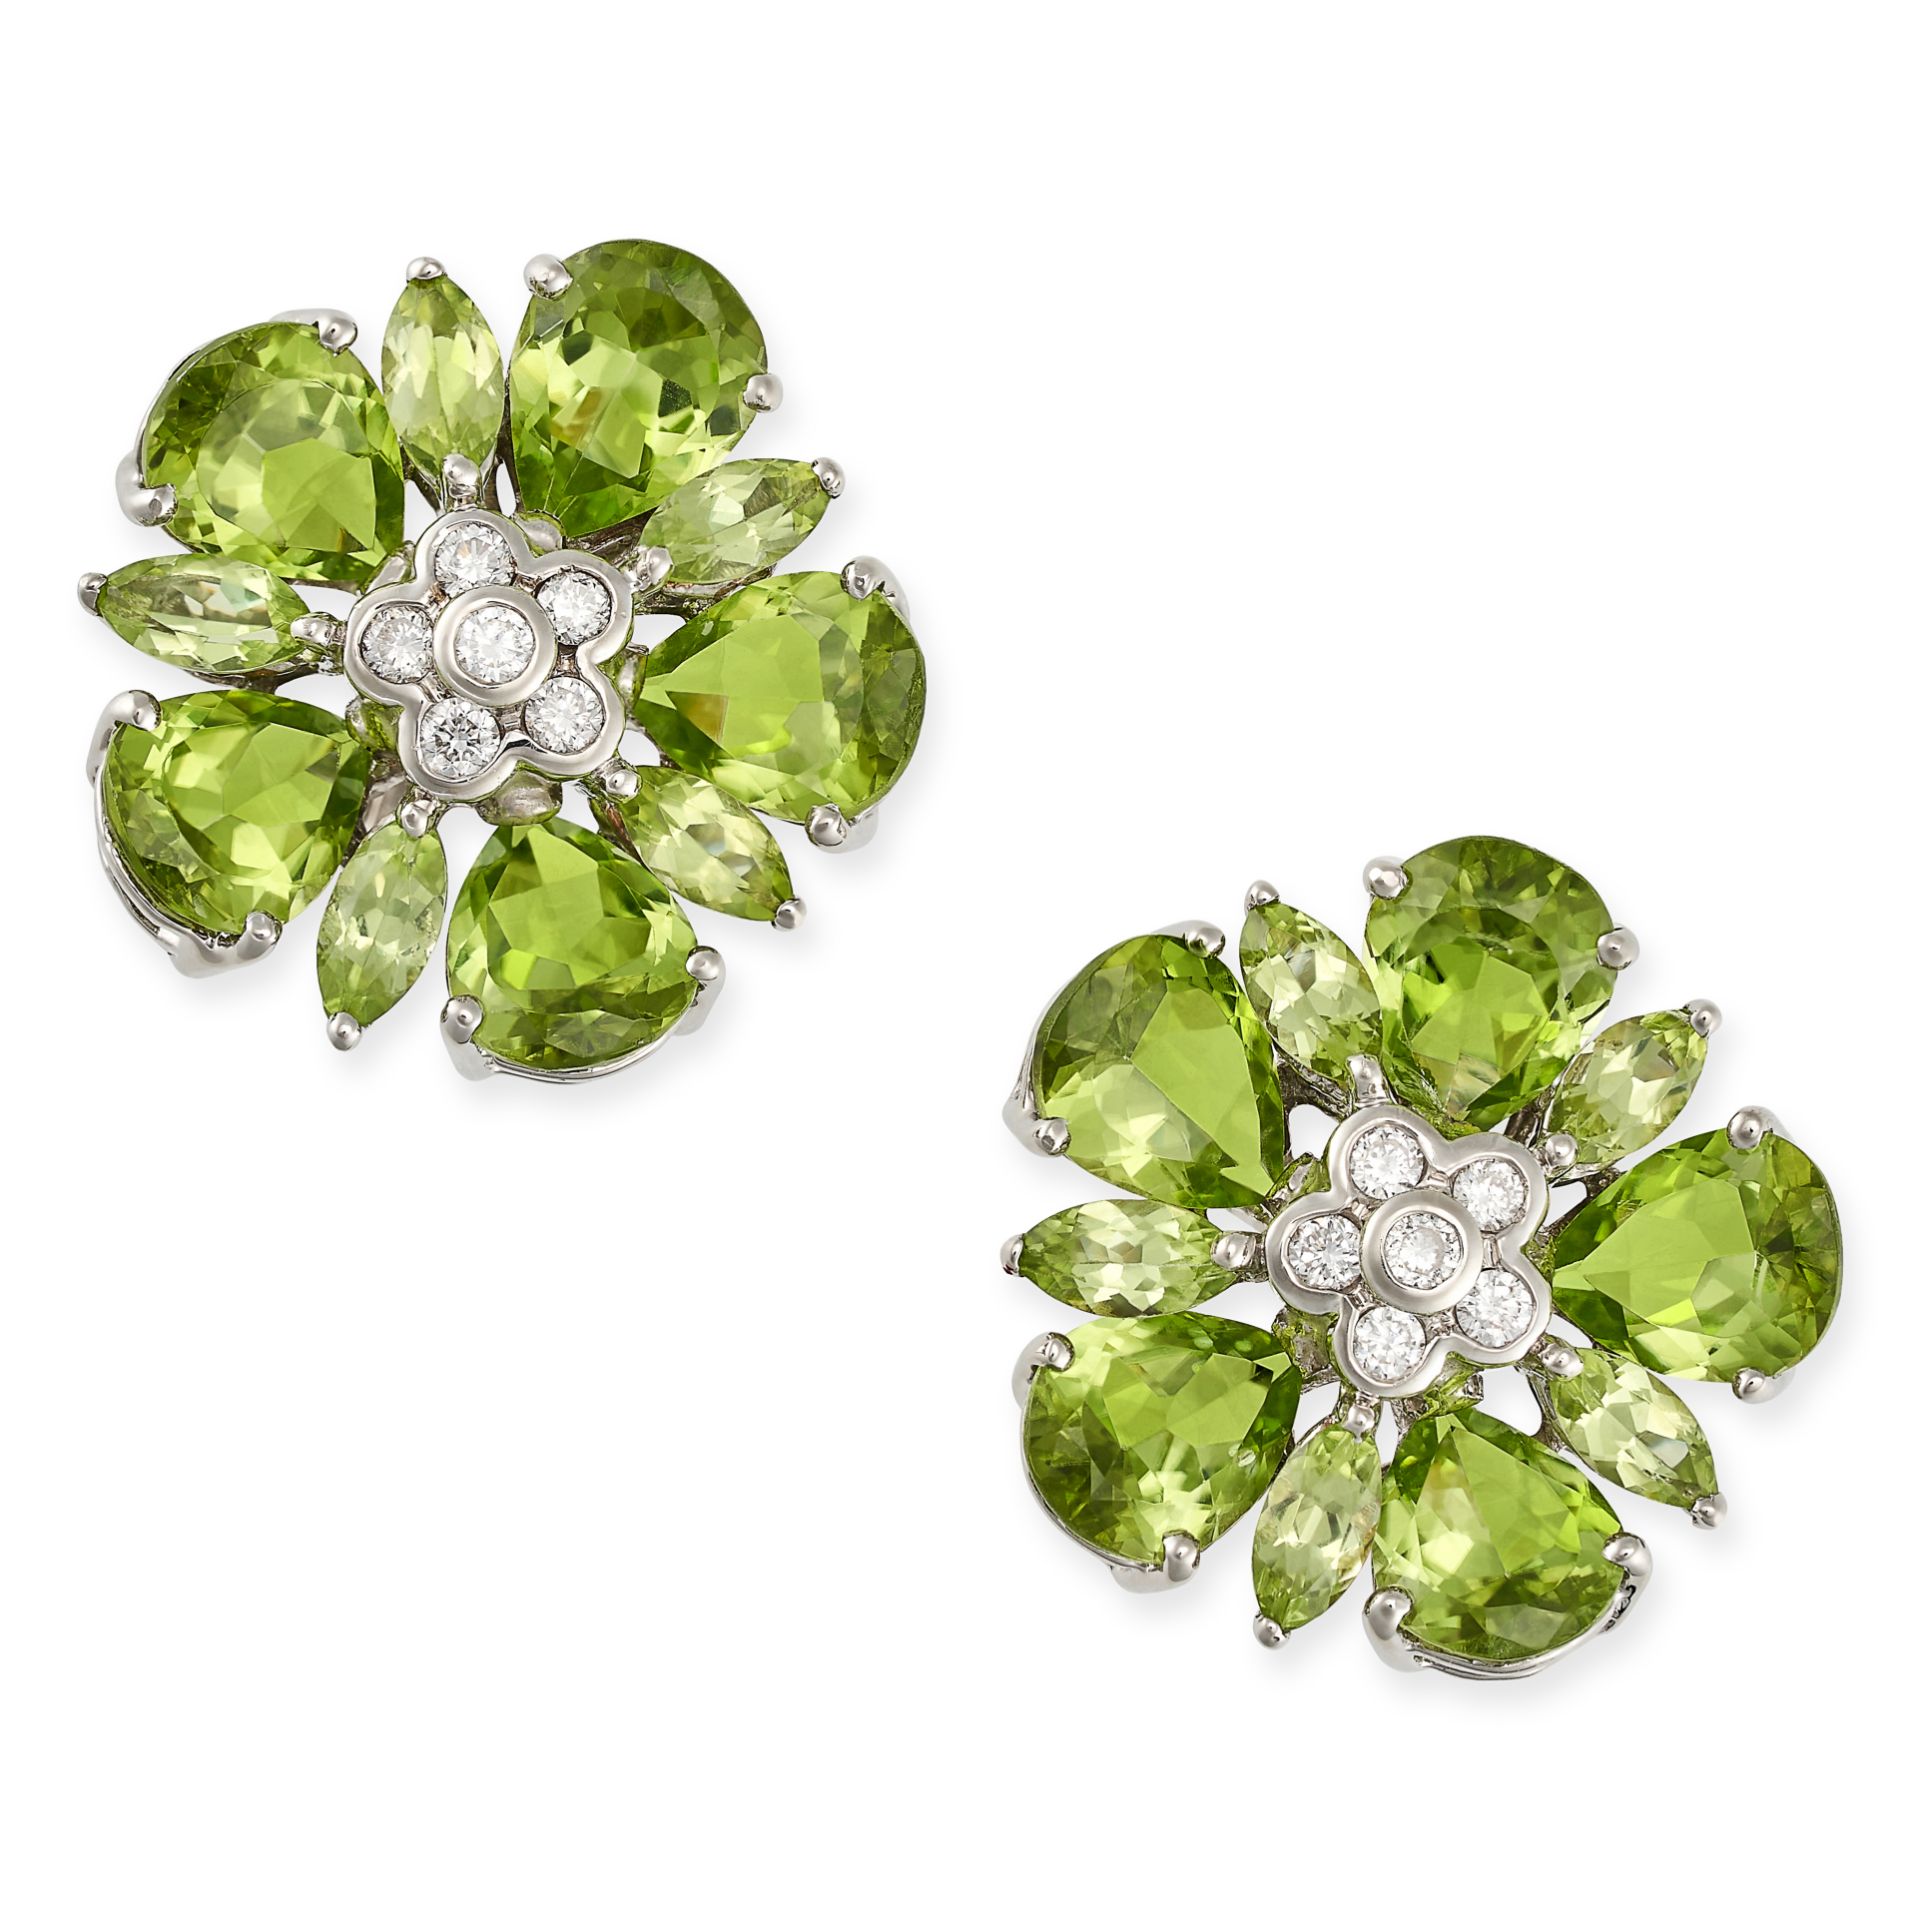 A PAIR OF PERIDOT AND DIAMOND FLOWER EARRINGS in 18ct white gold, each set with a cluster of round